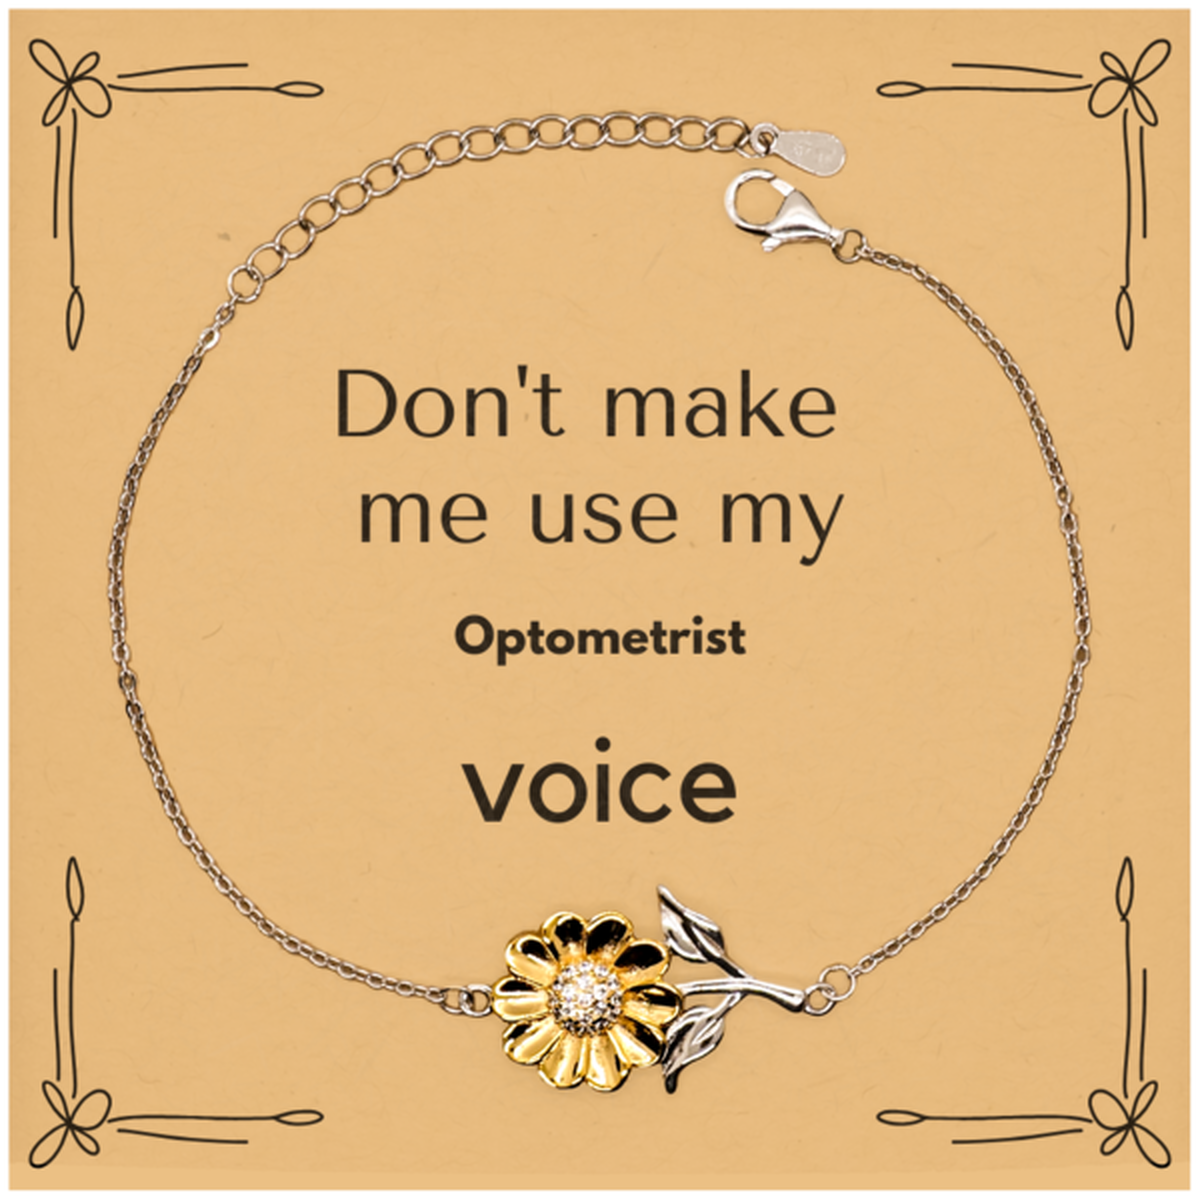 Don't make me use my Optometrist voice, Sarcasm Optometrist Card Gifts, Christmas Optometrist Sunflower Bracelet Birthday Unique Gifts For Optometrist Coworkers, Men, Women, Colleague, Friends